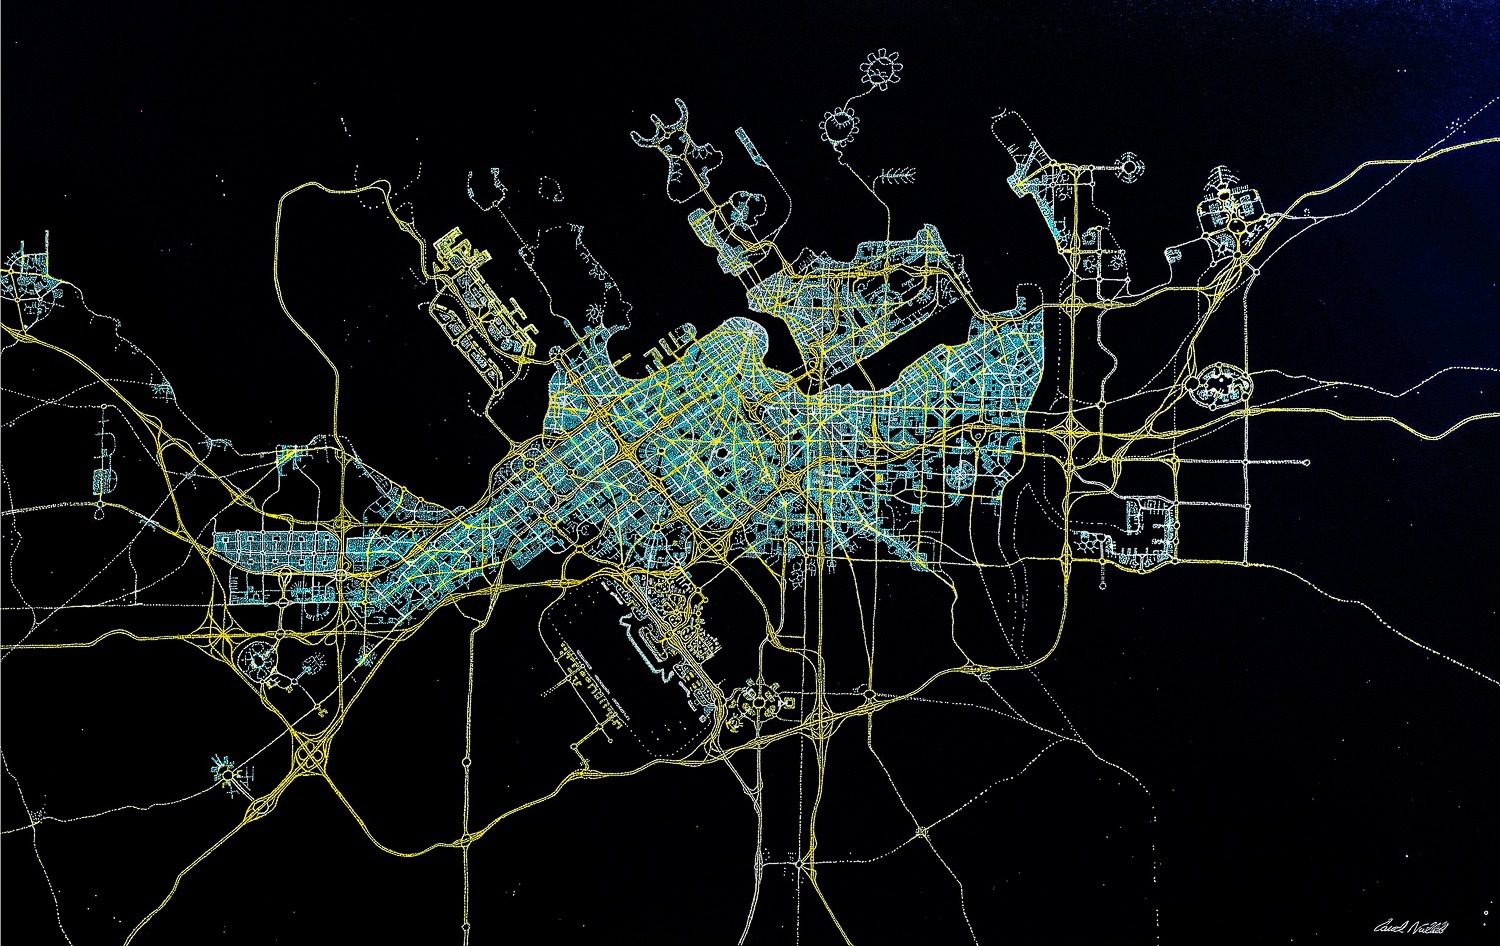 A map by David called Al Qalea by Night. It is set in the United Arab Emirates and is acrylic on canvas.